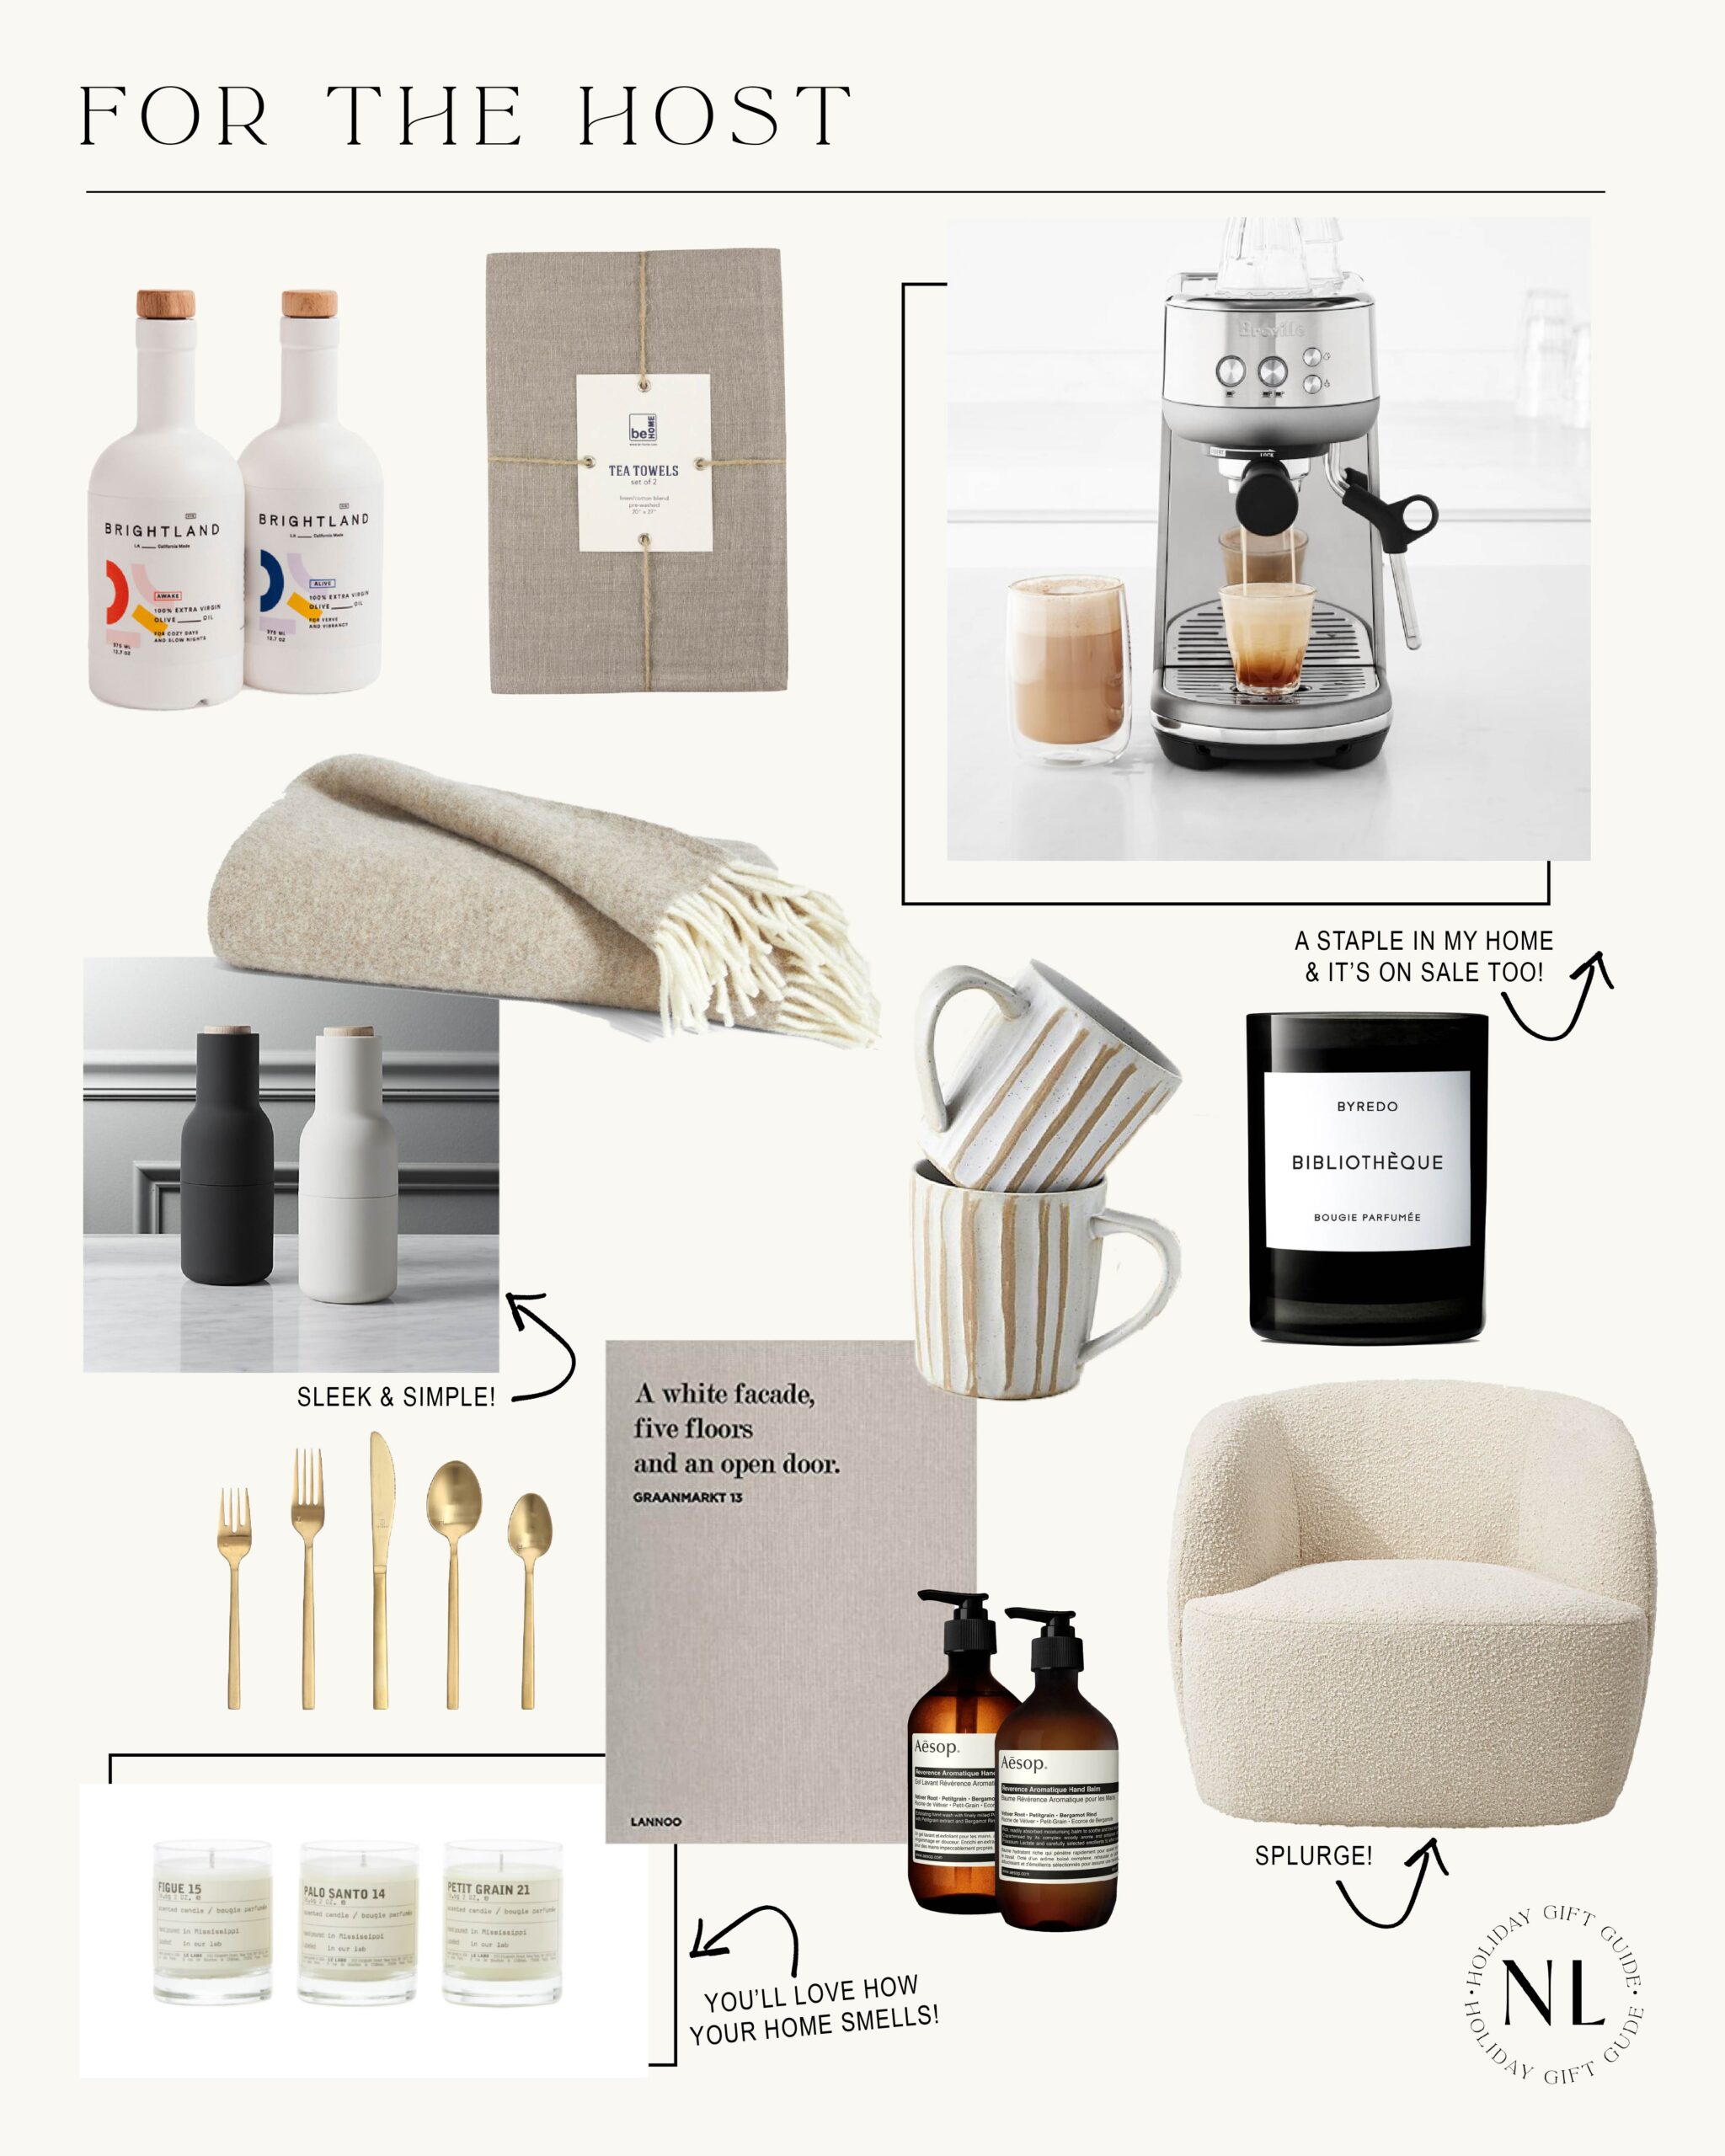 GIFT GUIDE: For the Host